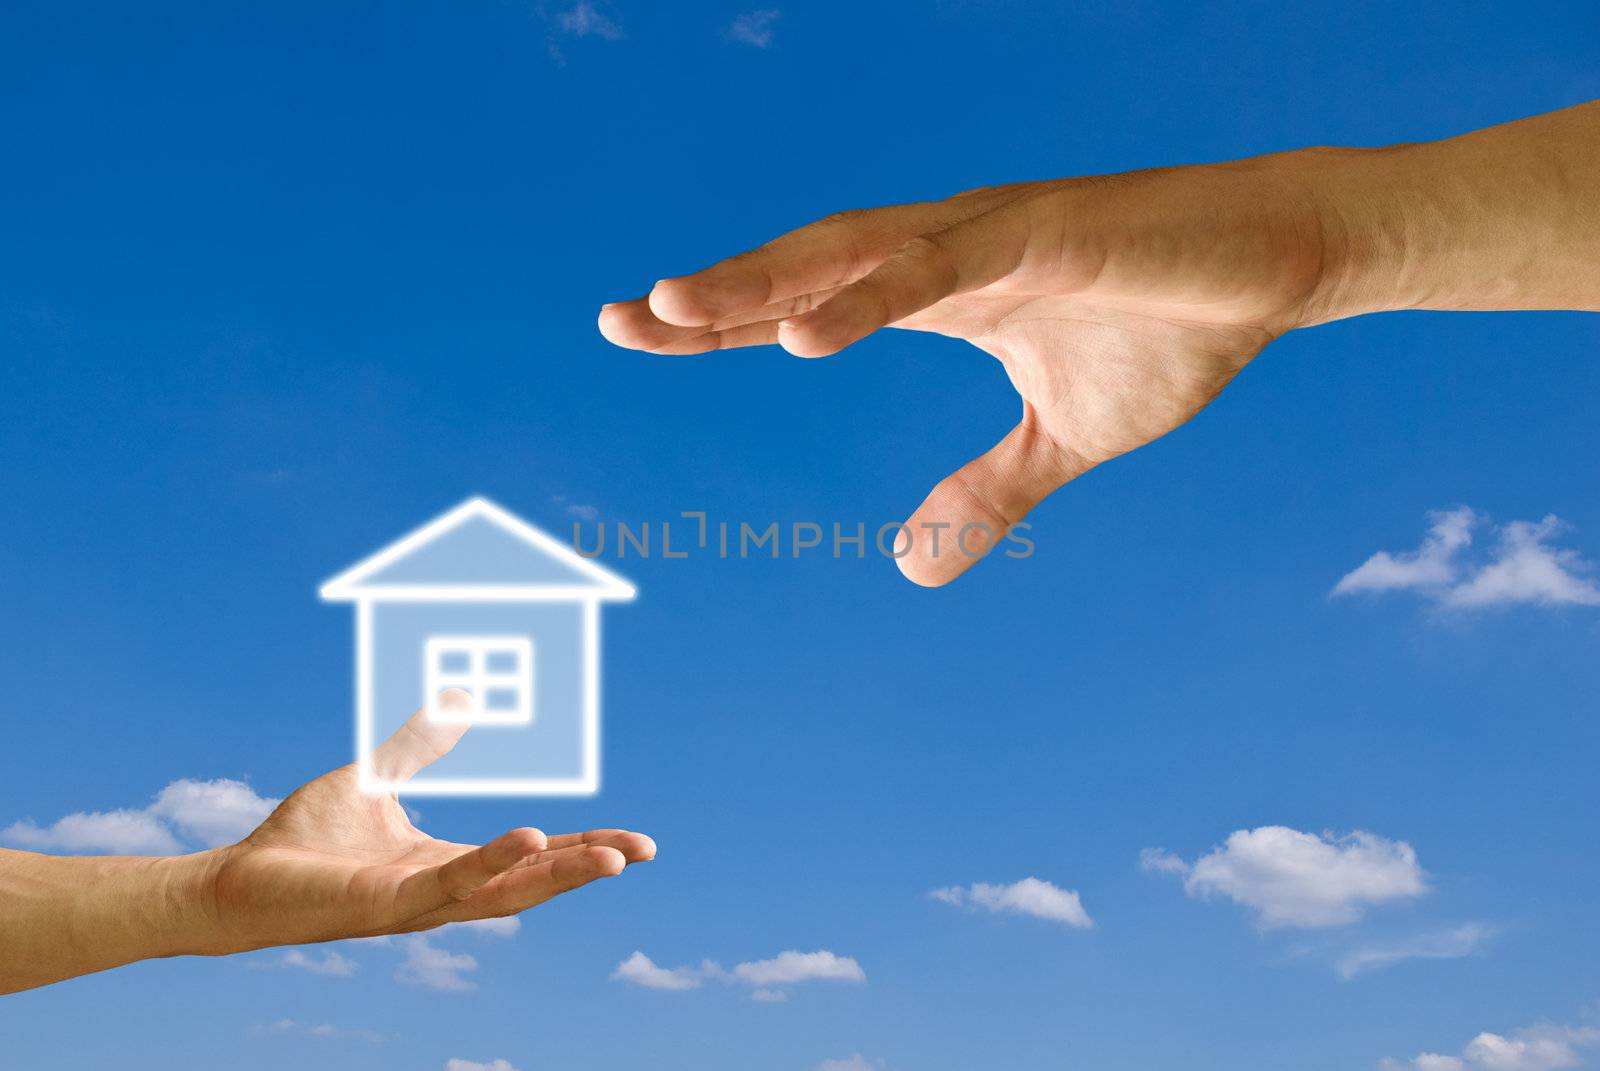 Small hand give the house icon to big hand by pixbox77